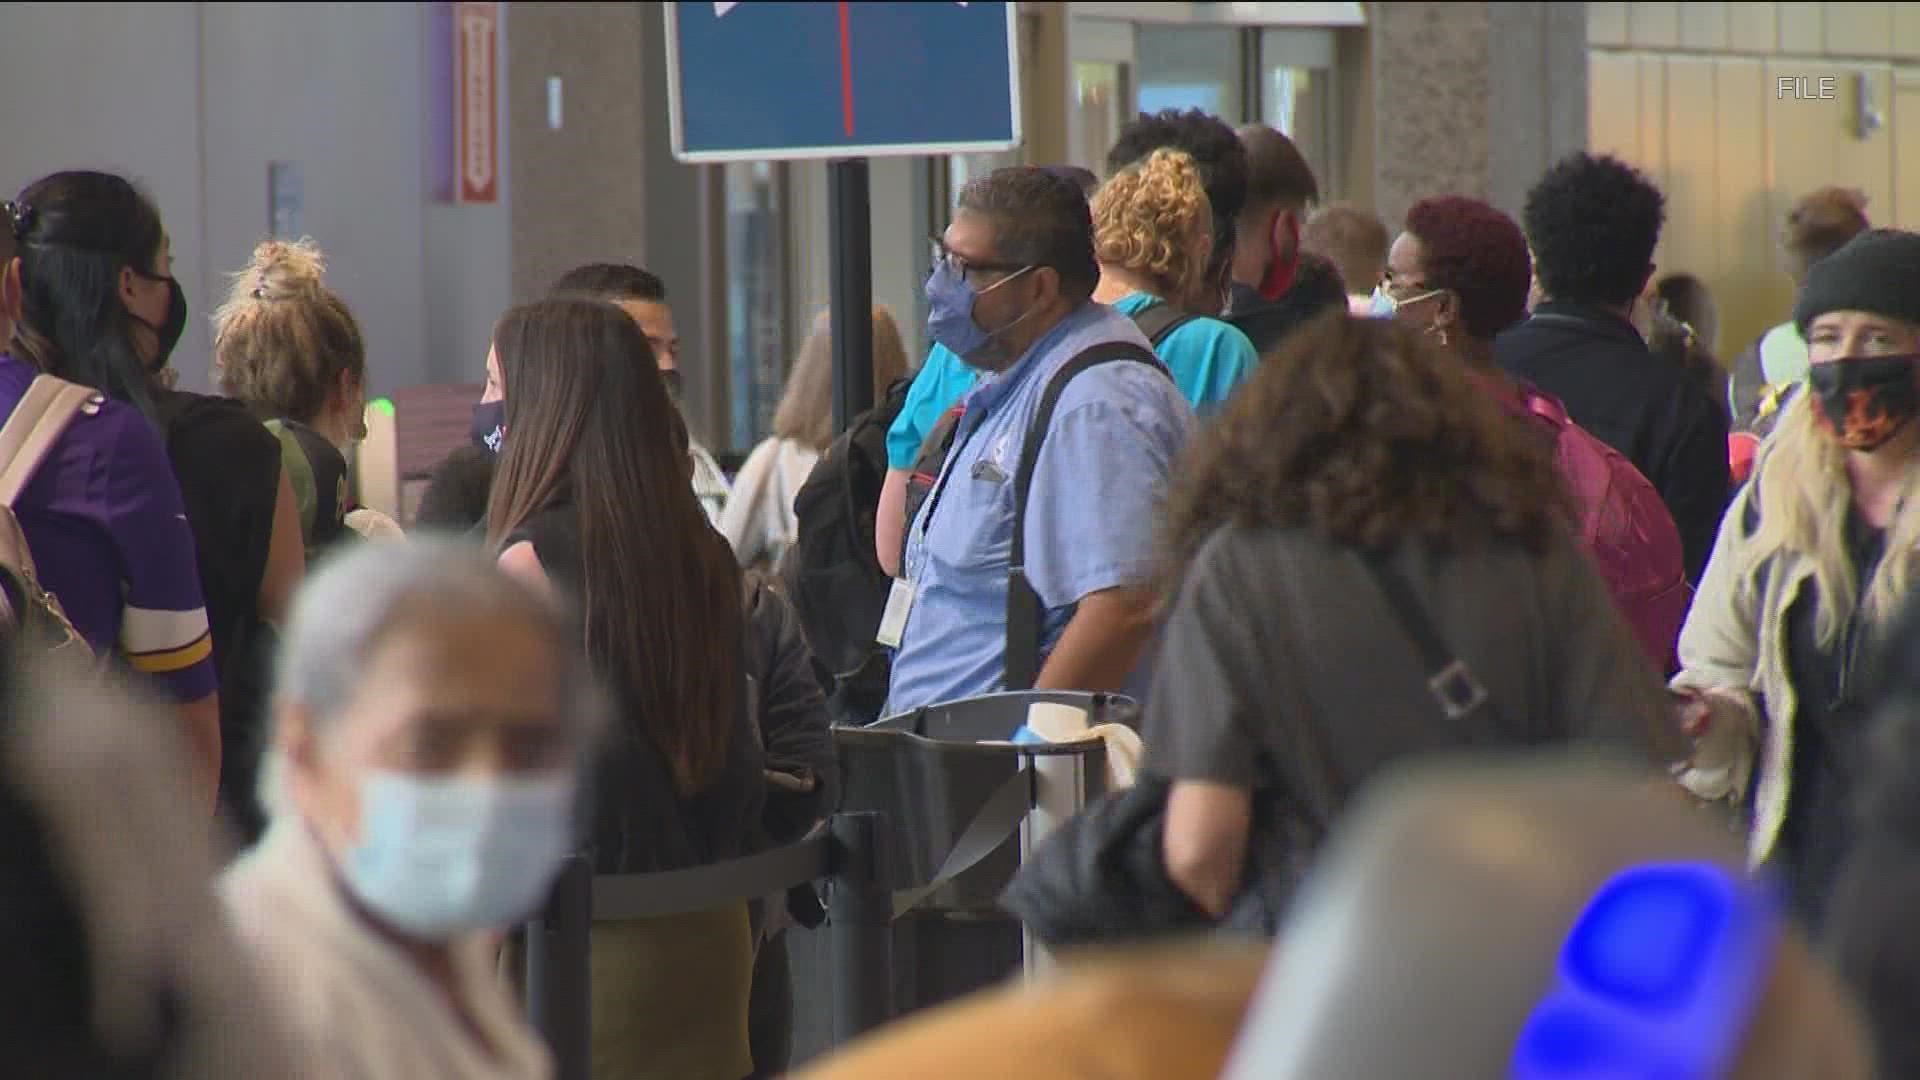 The open house comes as the airport is experiencing record-breaking growth.